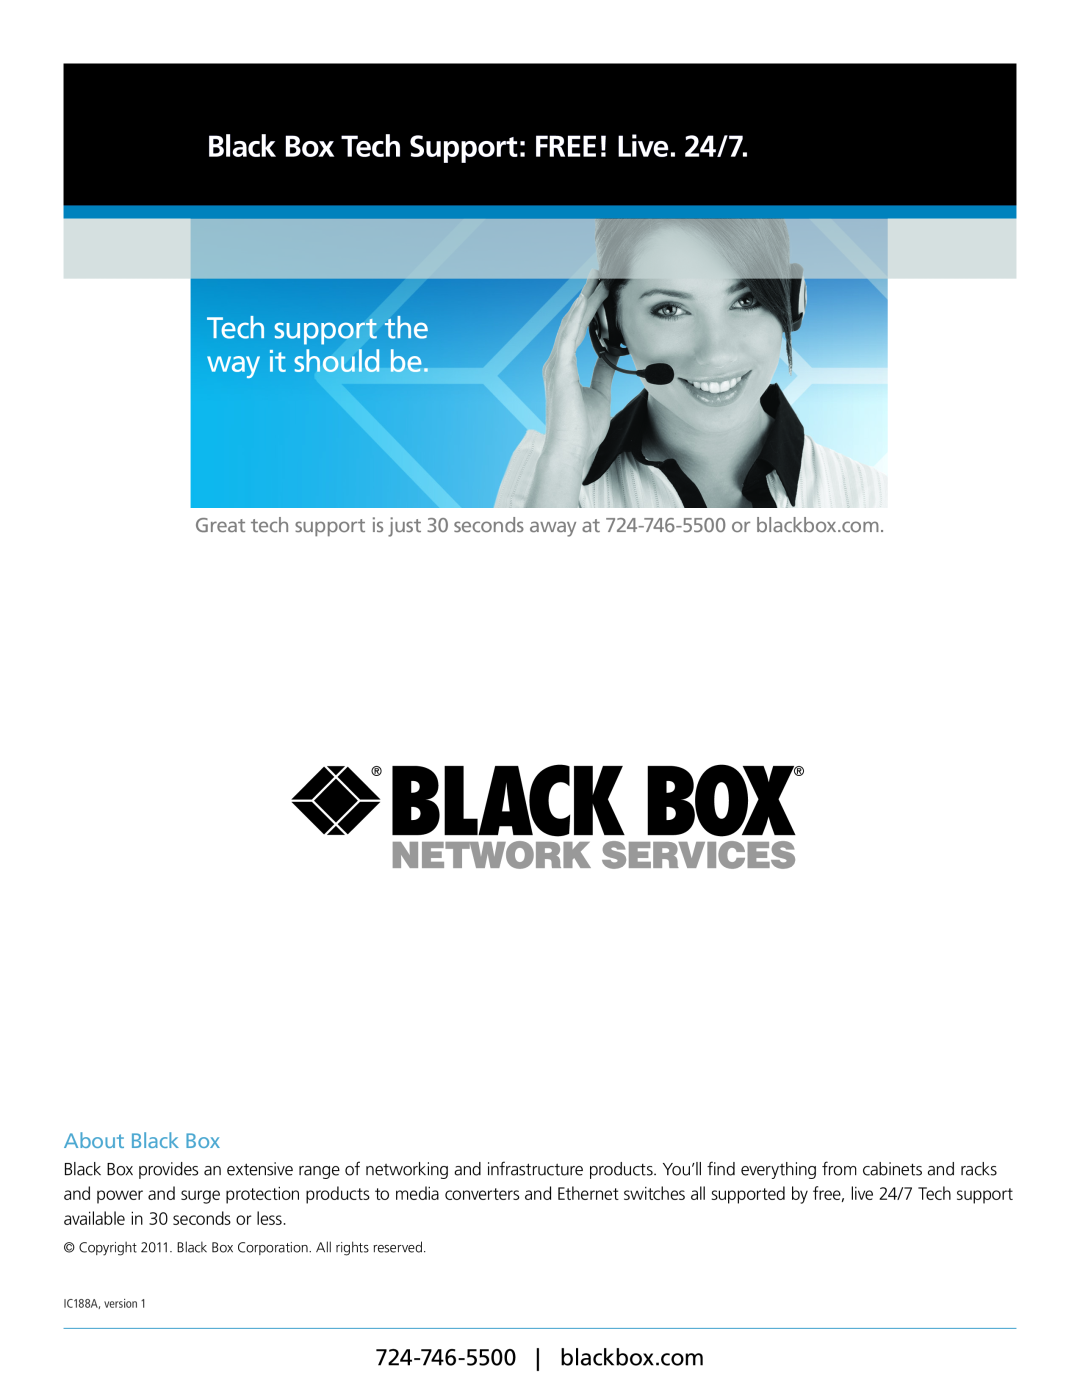 Black Box IC188A Black Box Tech Support FREE! Live. 24/7, Tech support the way it should be, blackbox.com, About Black Box 